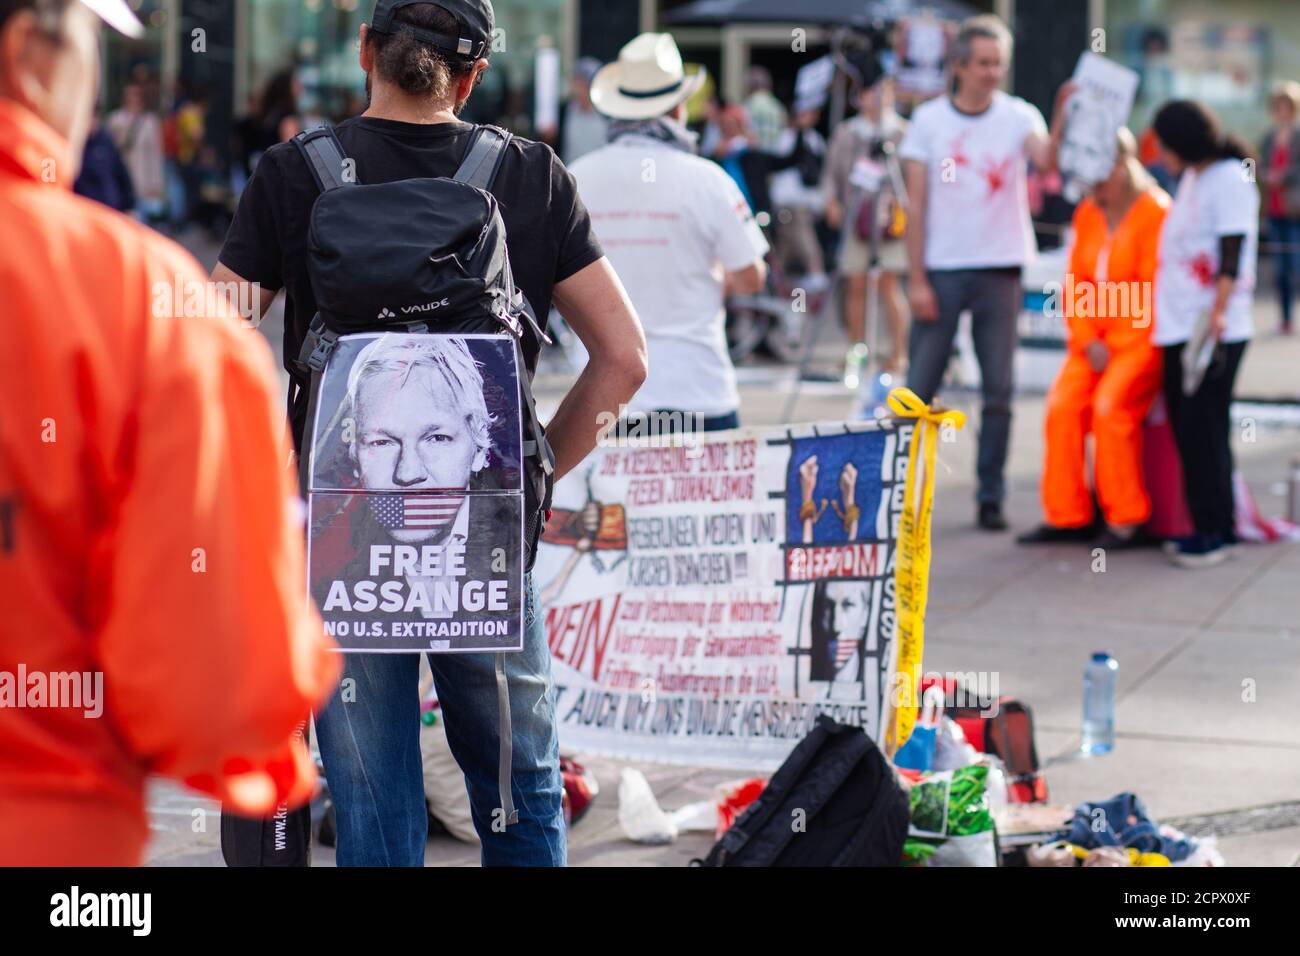 BERLIN - September 19: People demonstrate against the extradition of publisher Julian Assange to the United States, at a protest on 19 Sep 2020 in Berlin. Assange is wanted by the US government for distributing military documents that showed evidence of war crimes, and faces extradition from the UK to the US. Stock Photo